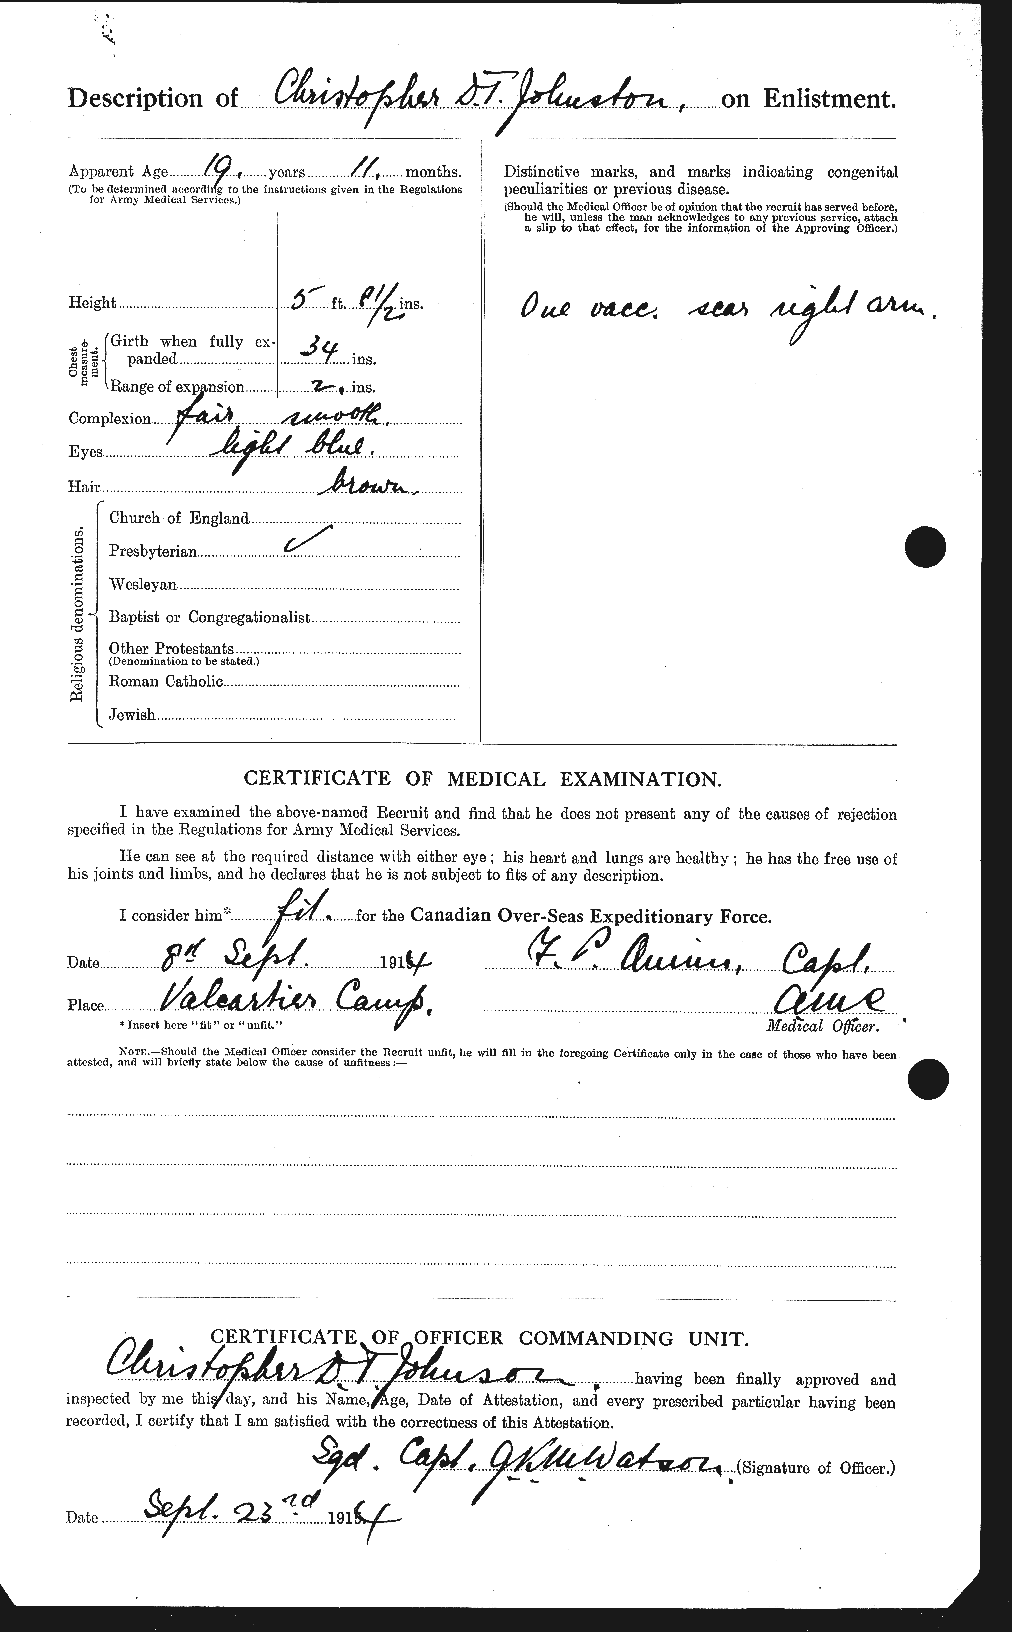 Personnel Records of the First World War - CEF 423129b